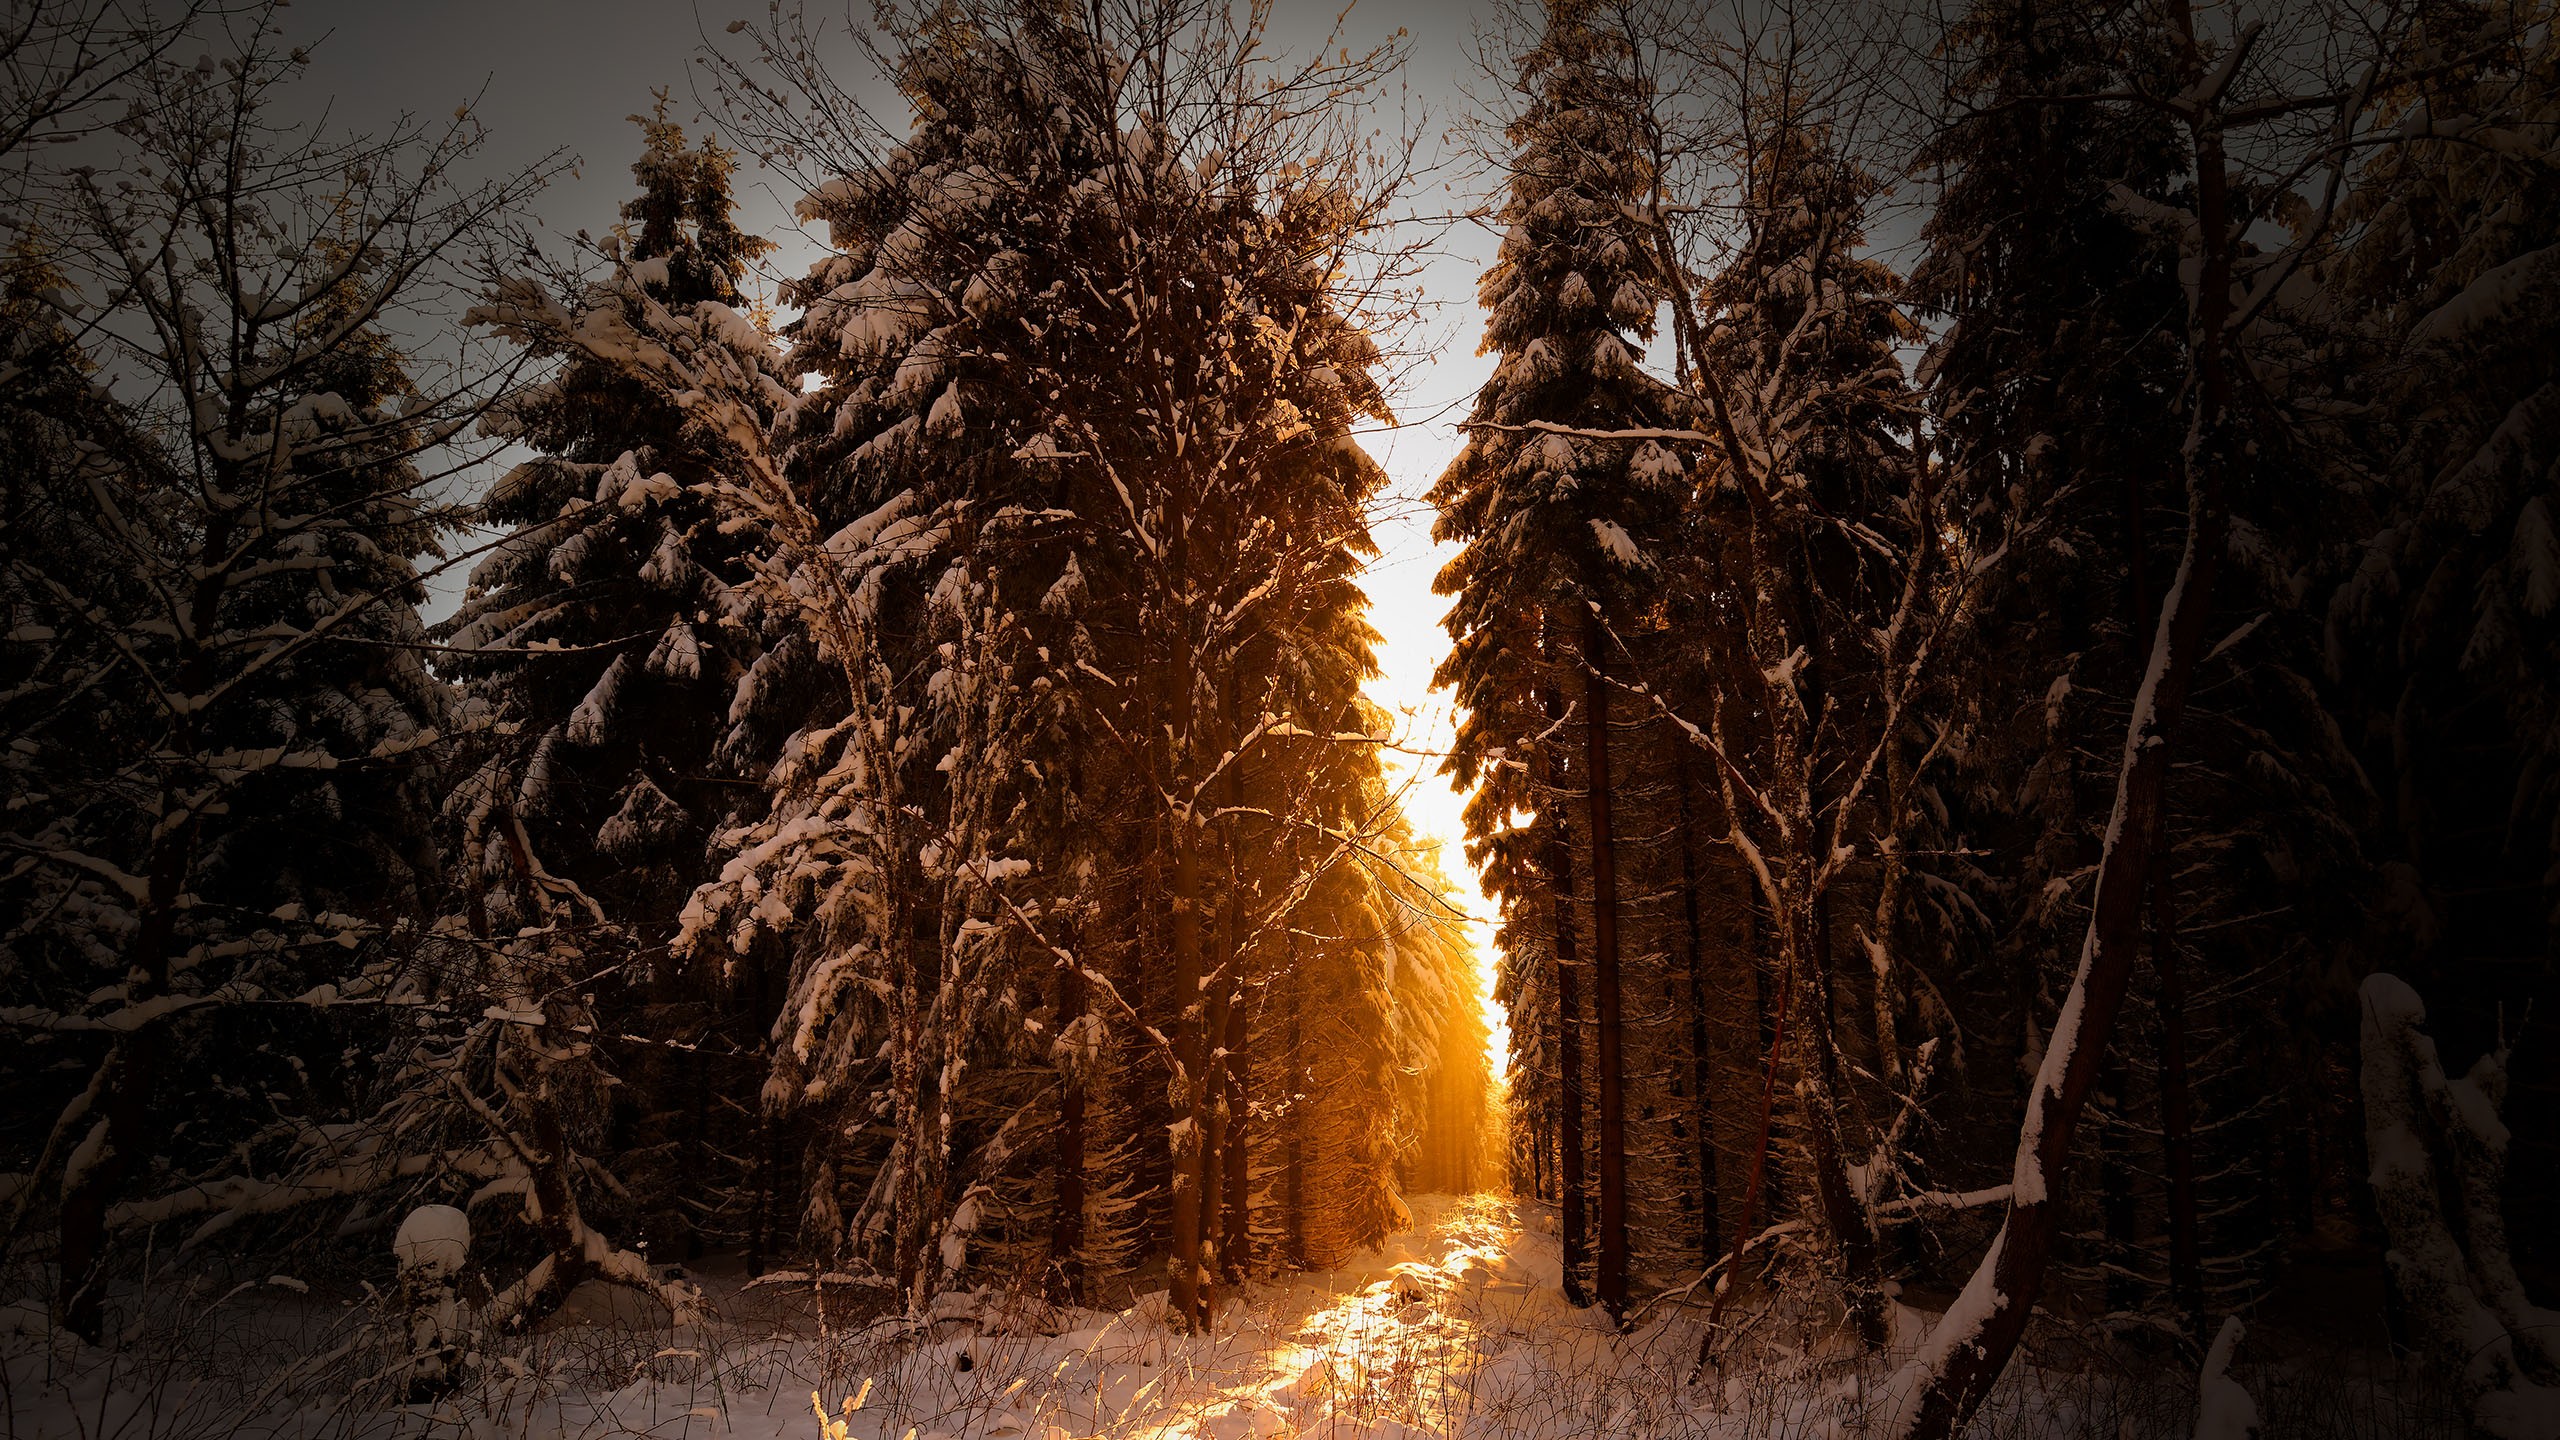 General 2560x1440 trees snow sunlight winter outdoors nature